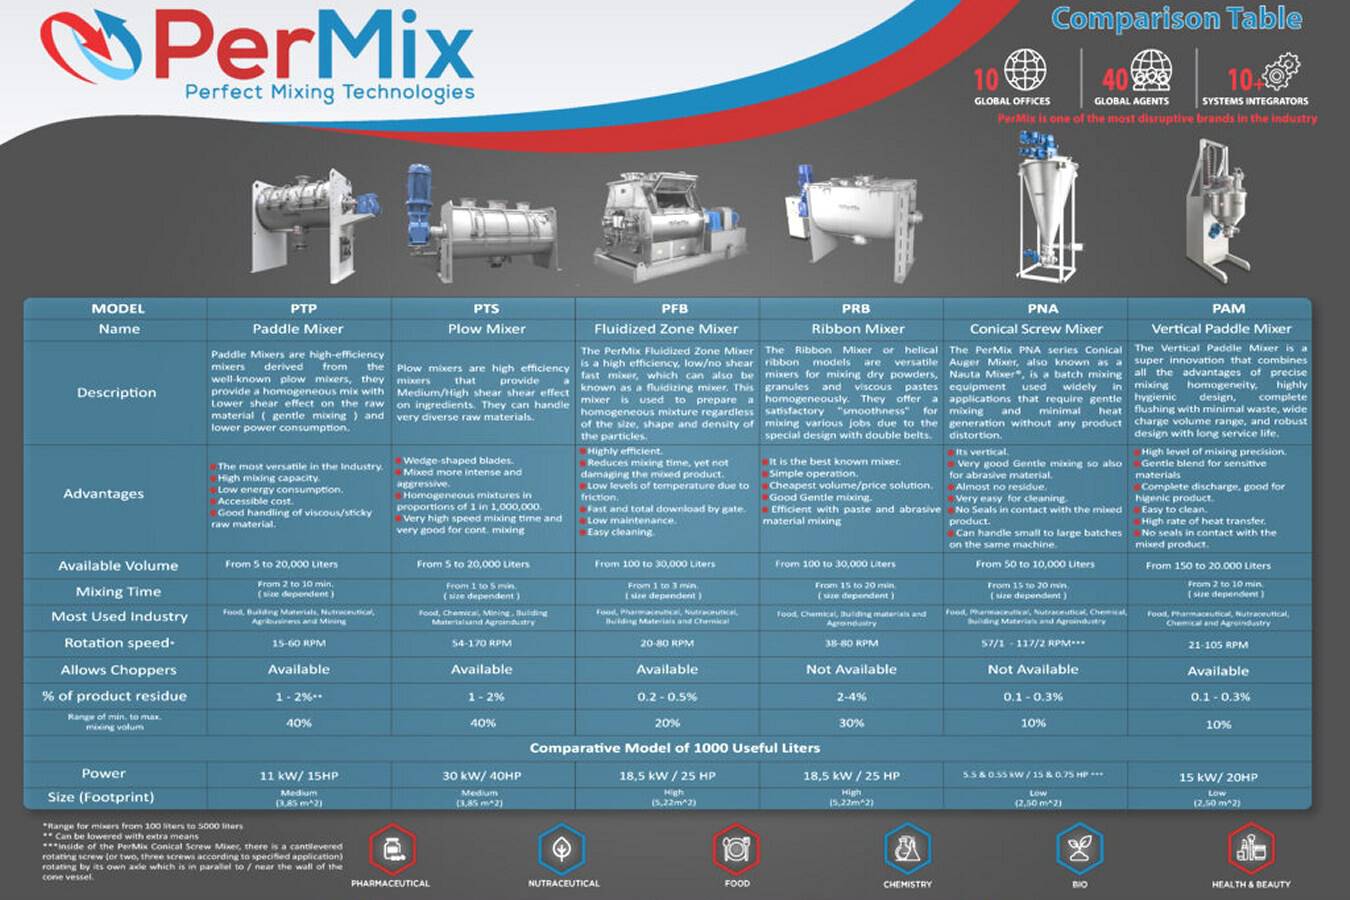 Powder Mixers: Which One Is Best For My Application? Comparison table: What Are The Differences Between Powder Mixers? 